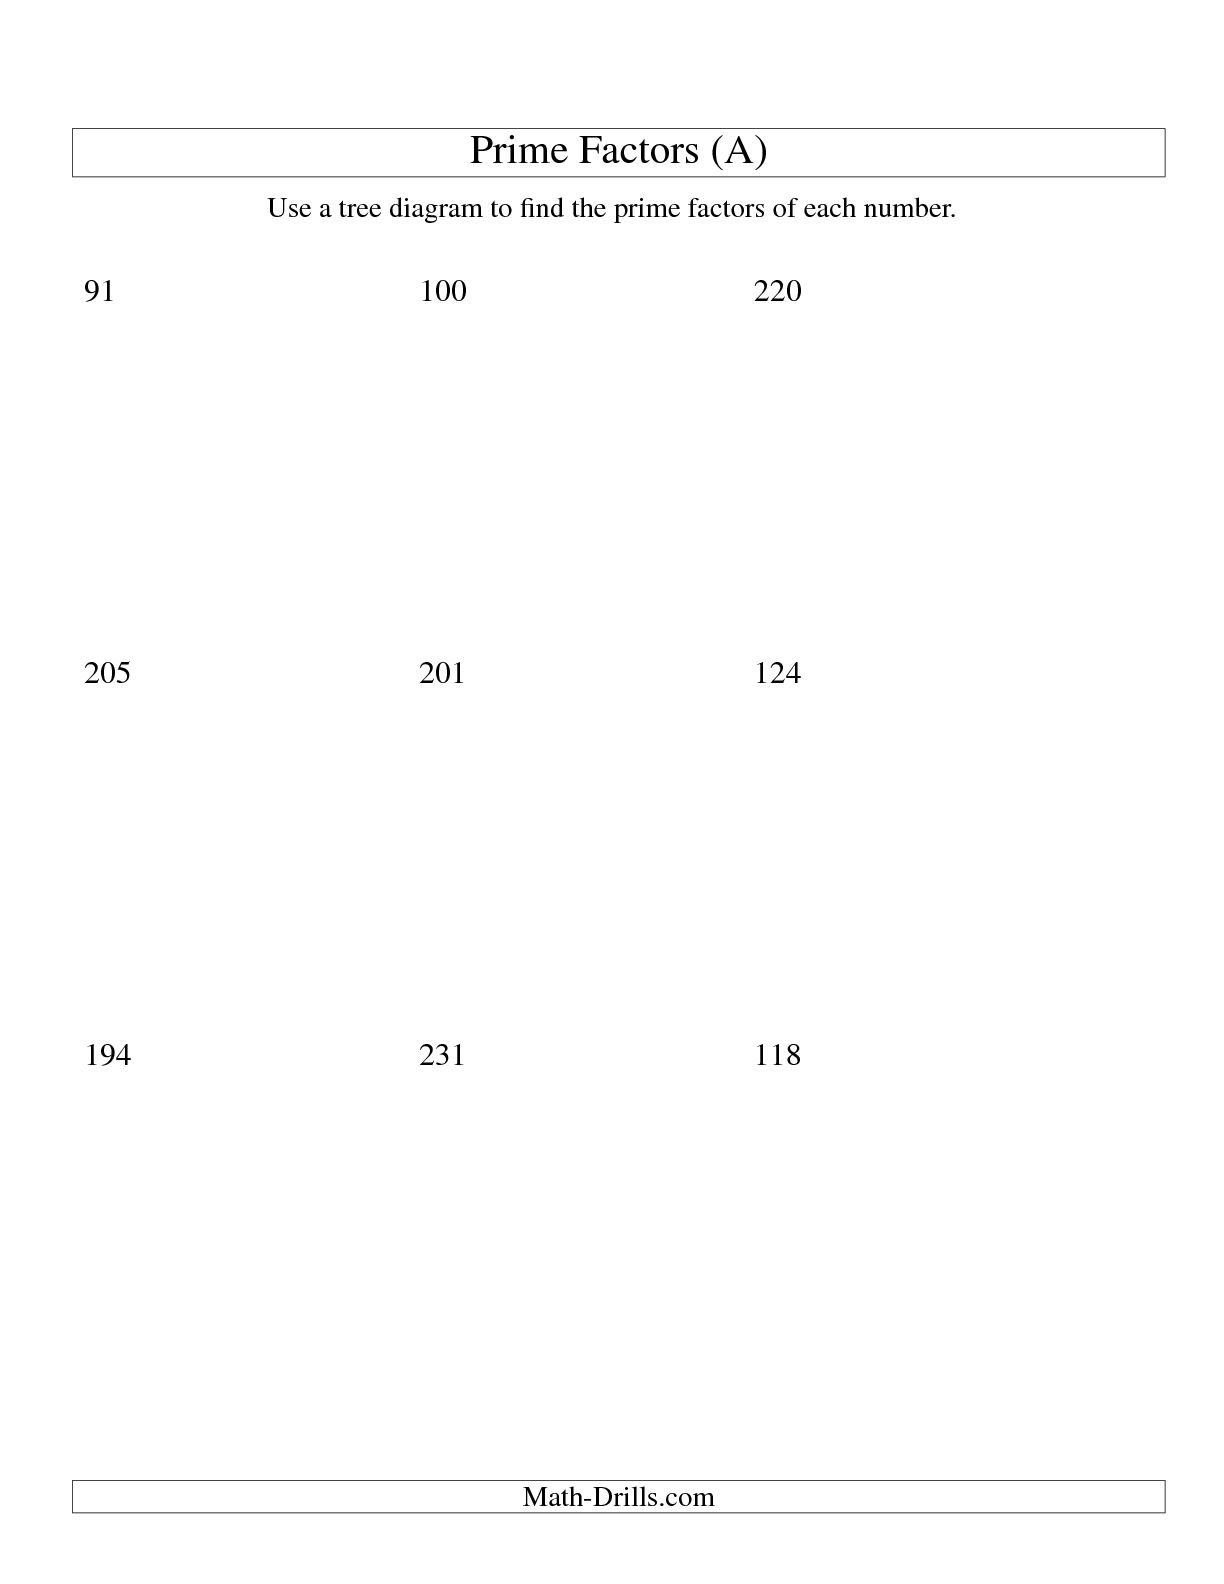 17 Best Images of Factor Tree Practice Worksheet - Greatest Common